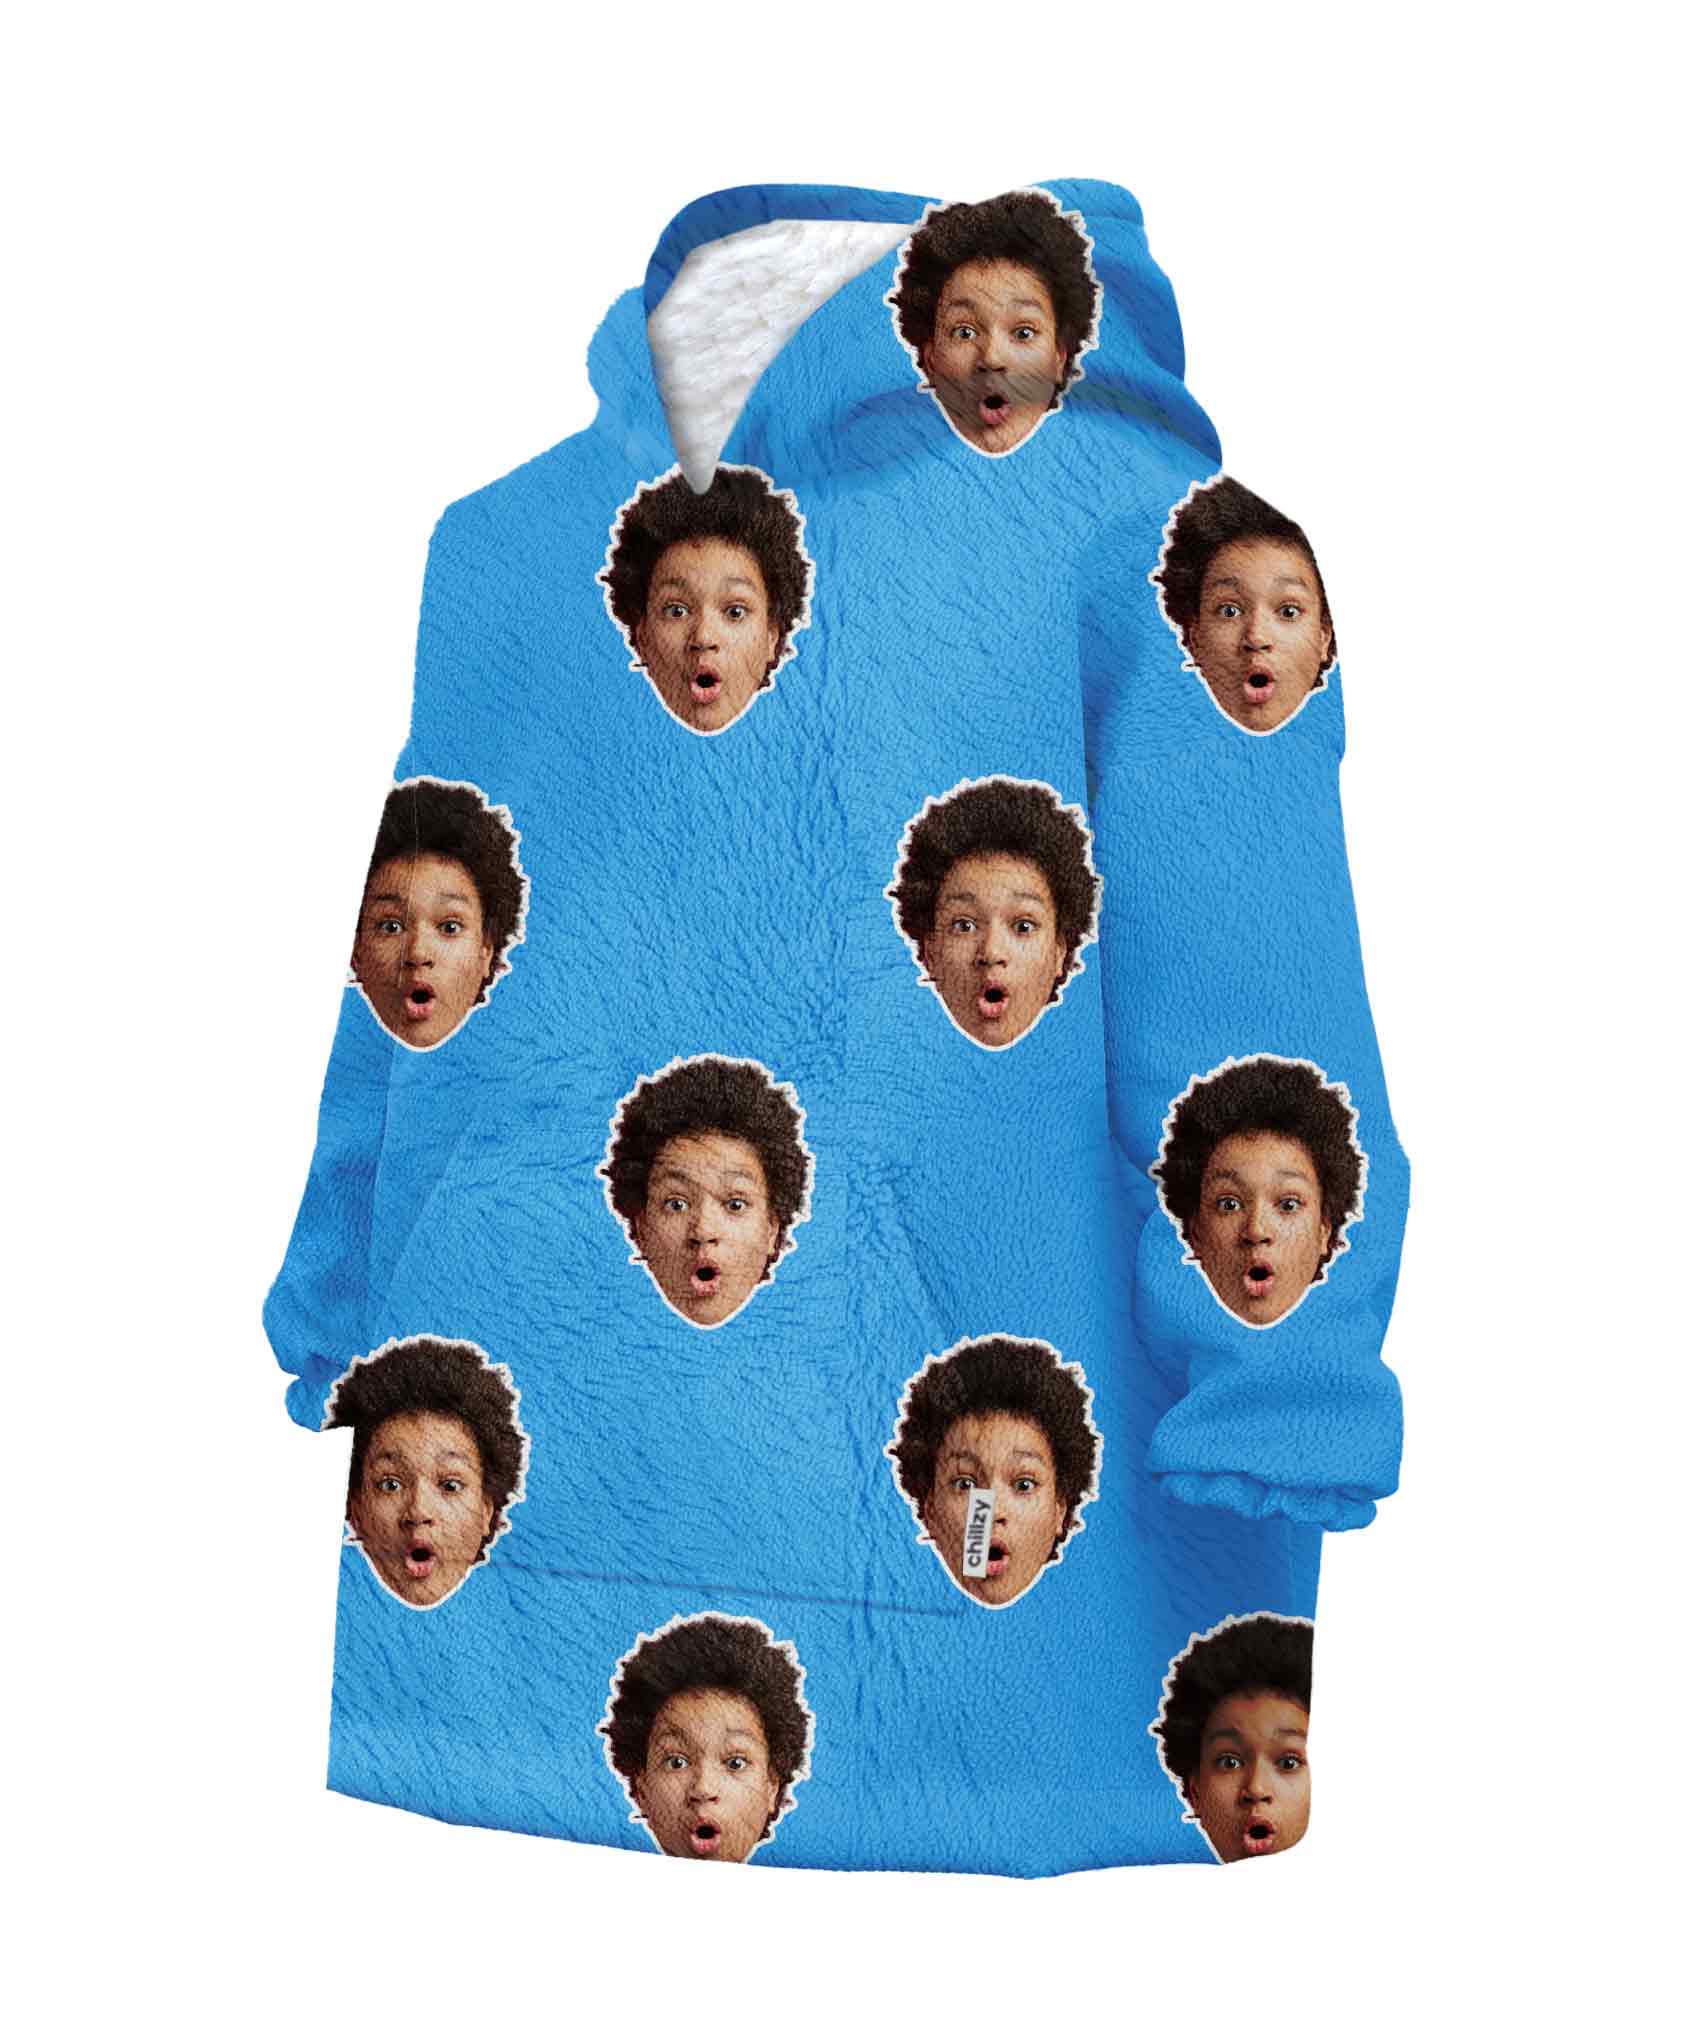 Your Face Chillzy Kids Hoodie Blanket